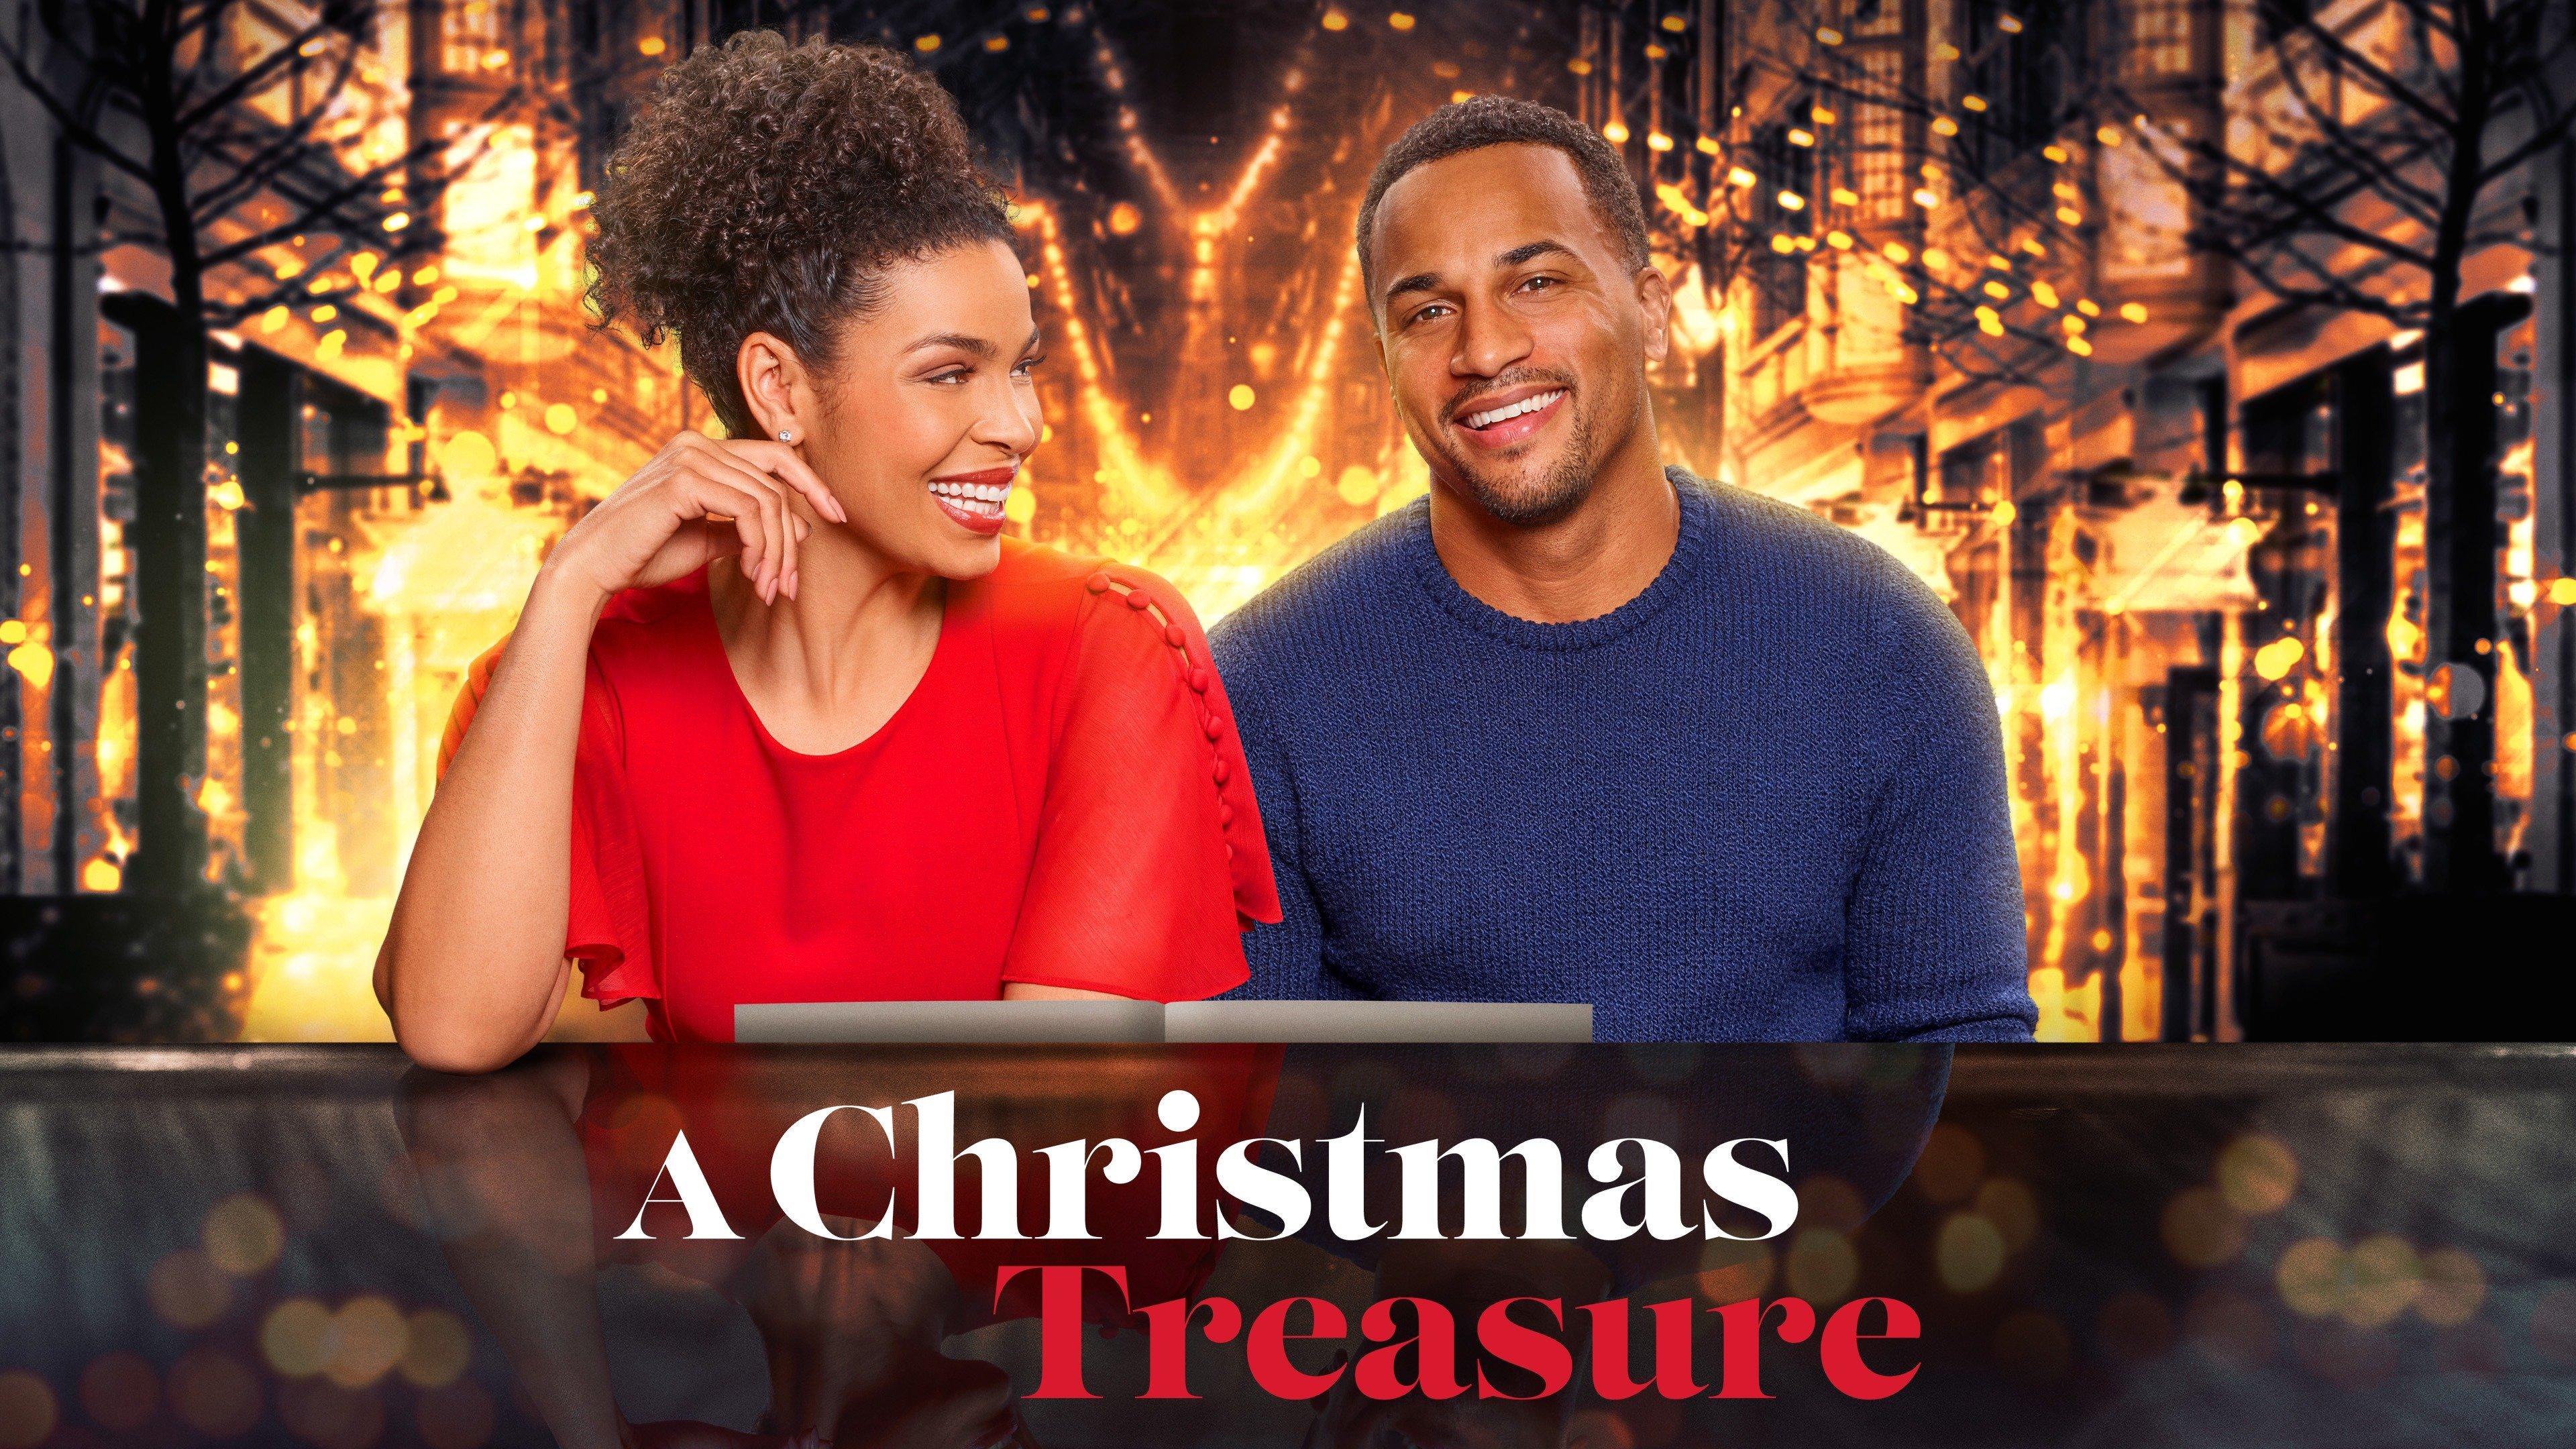 Watch A Christmas Treasure Streaming Online Philo (Free Trial)